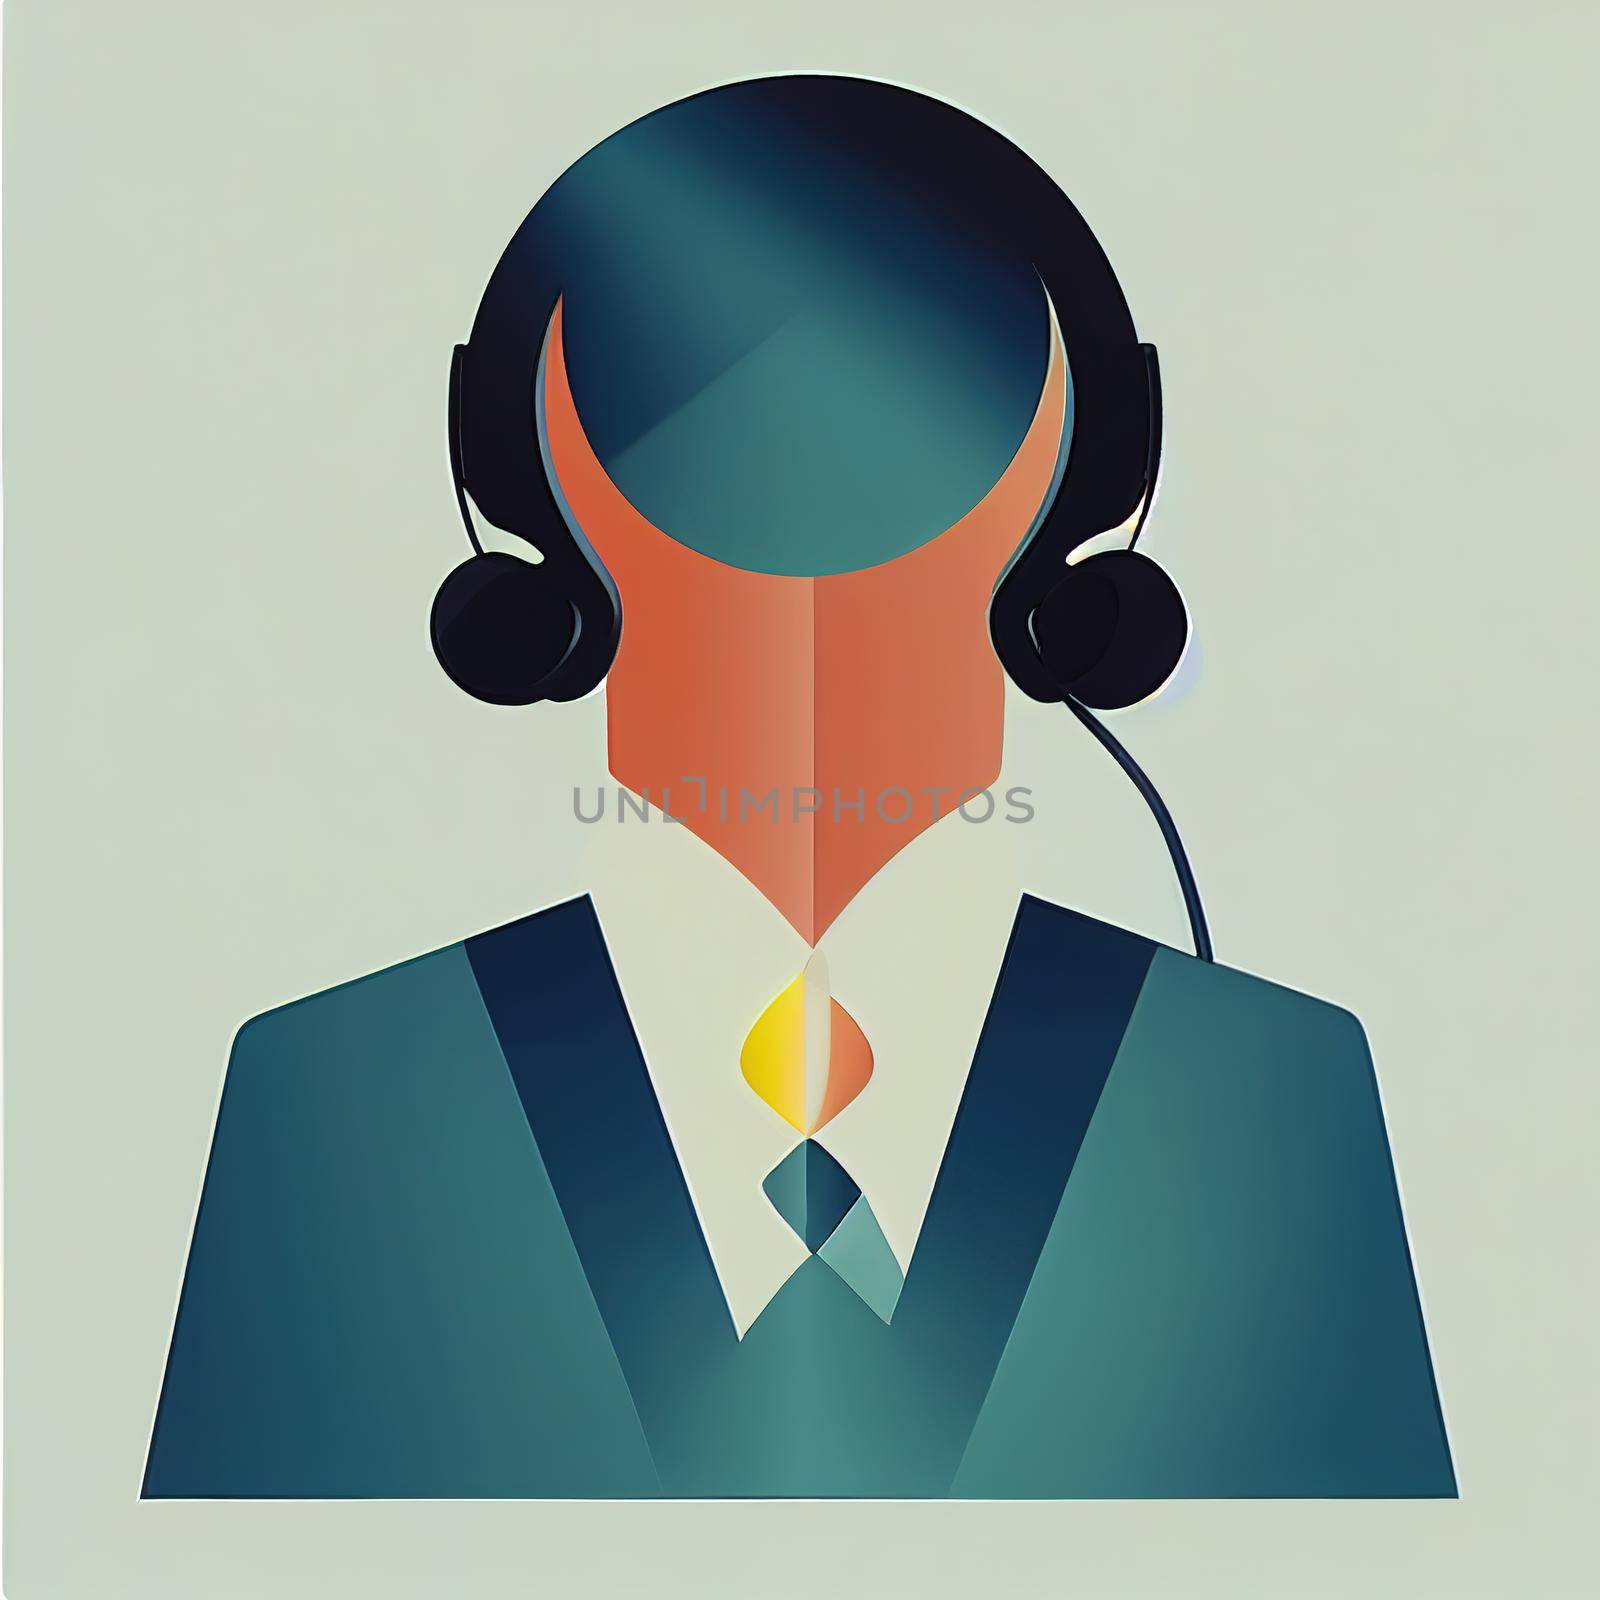 person icon in call center. High quality 3d illustration